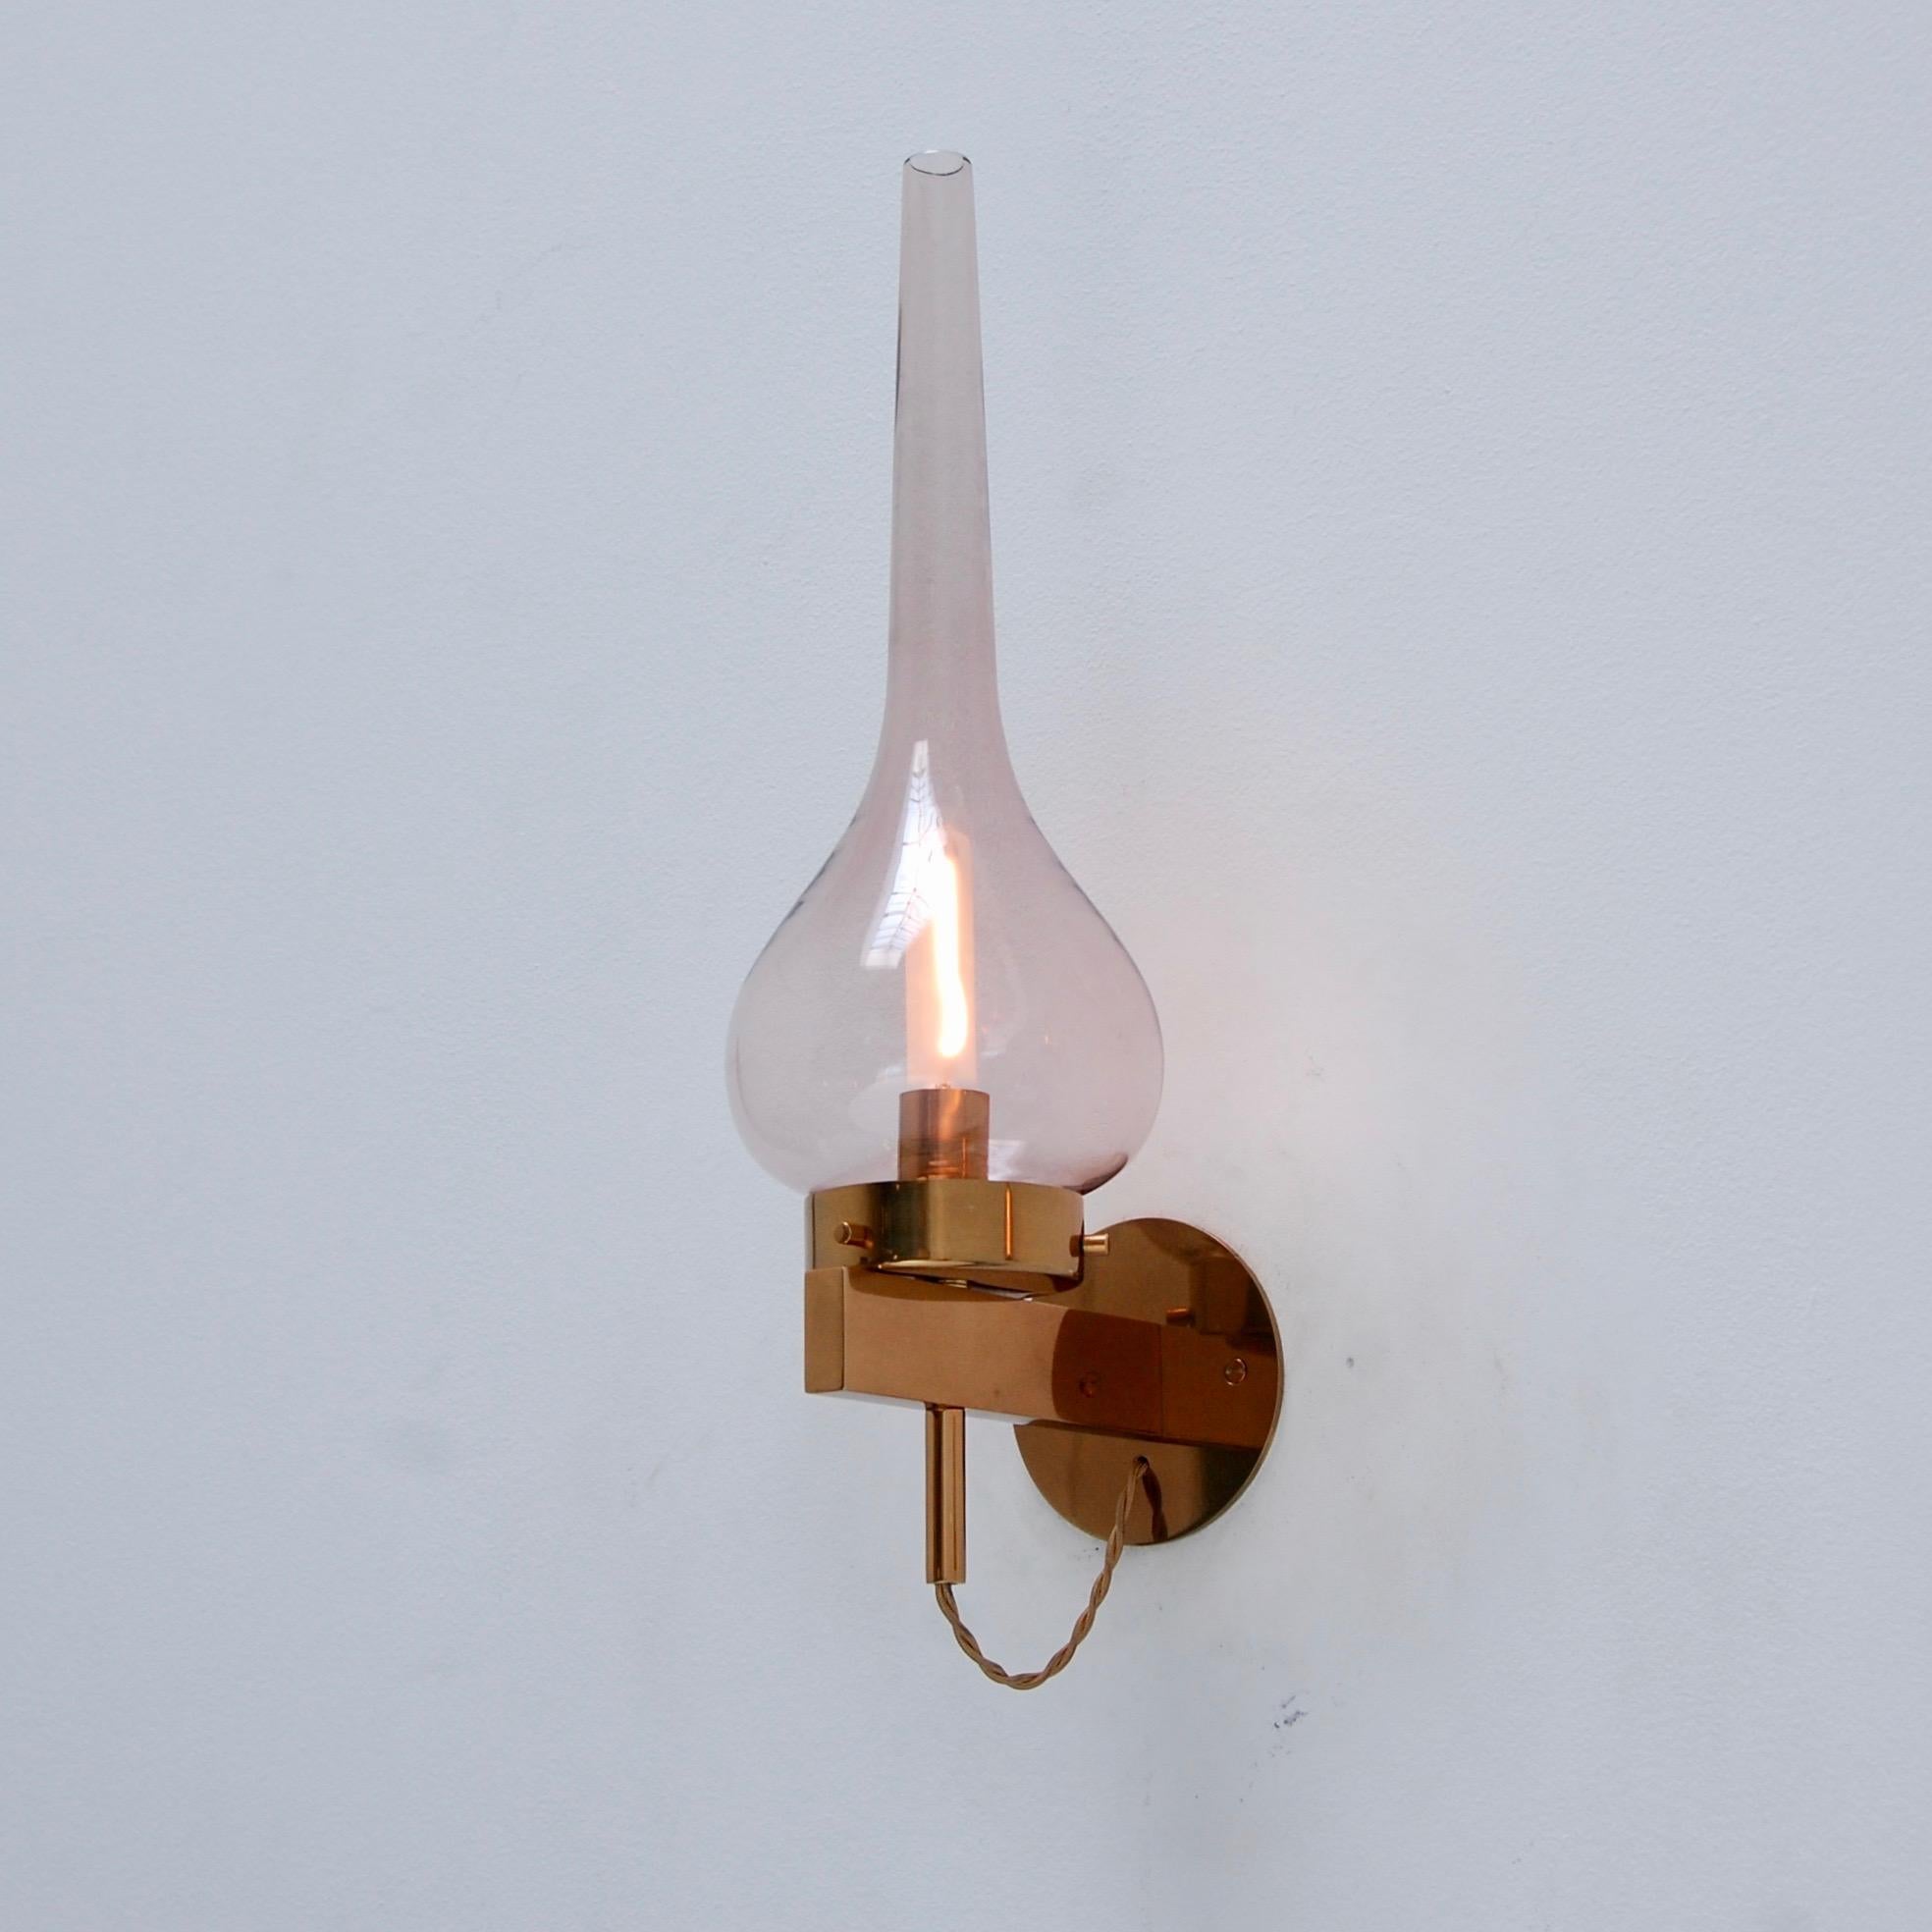 Stunning pair of rose smoked glass Lumiere sconces with beautiful polished brass hardware from the 1960s. Fully restored. Rewired for use in the US. E12 Candelabra based socket. Light bulb included. Can use round or tube shaped bulbs as shown.